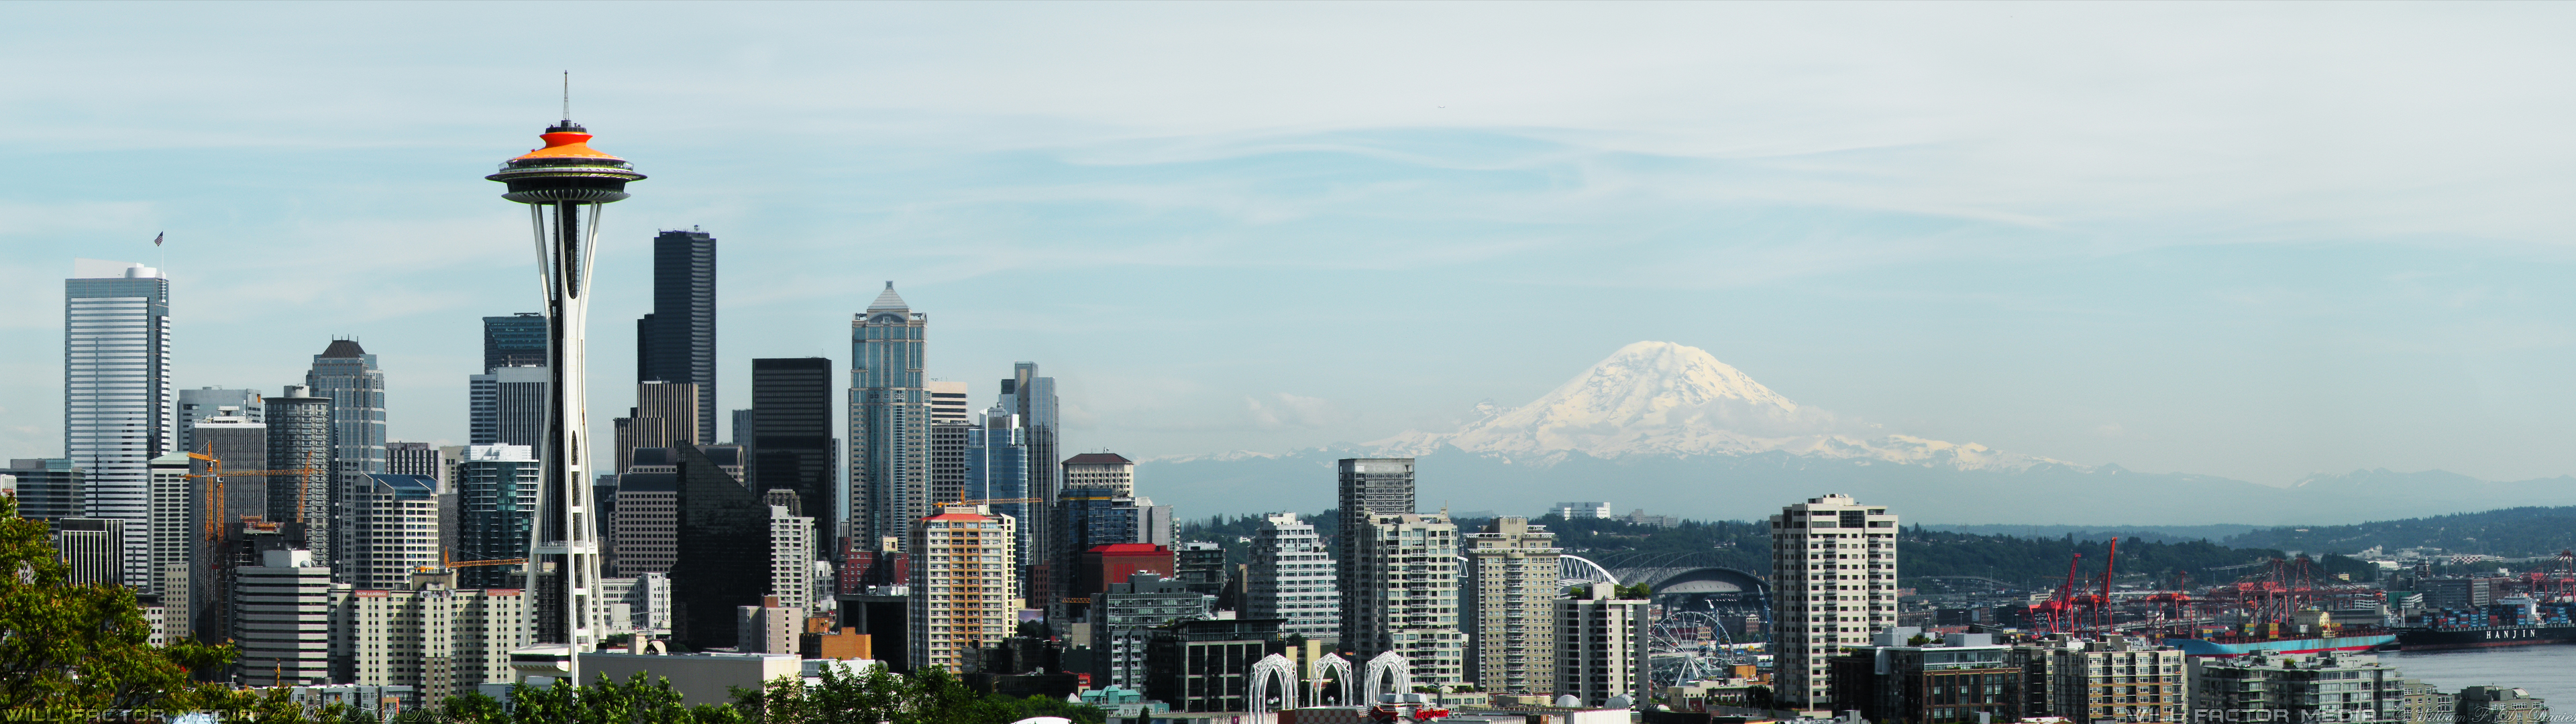 Dual Monitor 3840x1080 Seattle Wallpaper by WillFactorMedia on 3840x1080